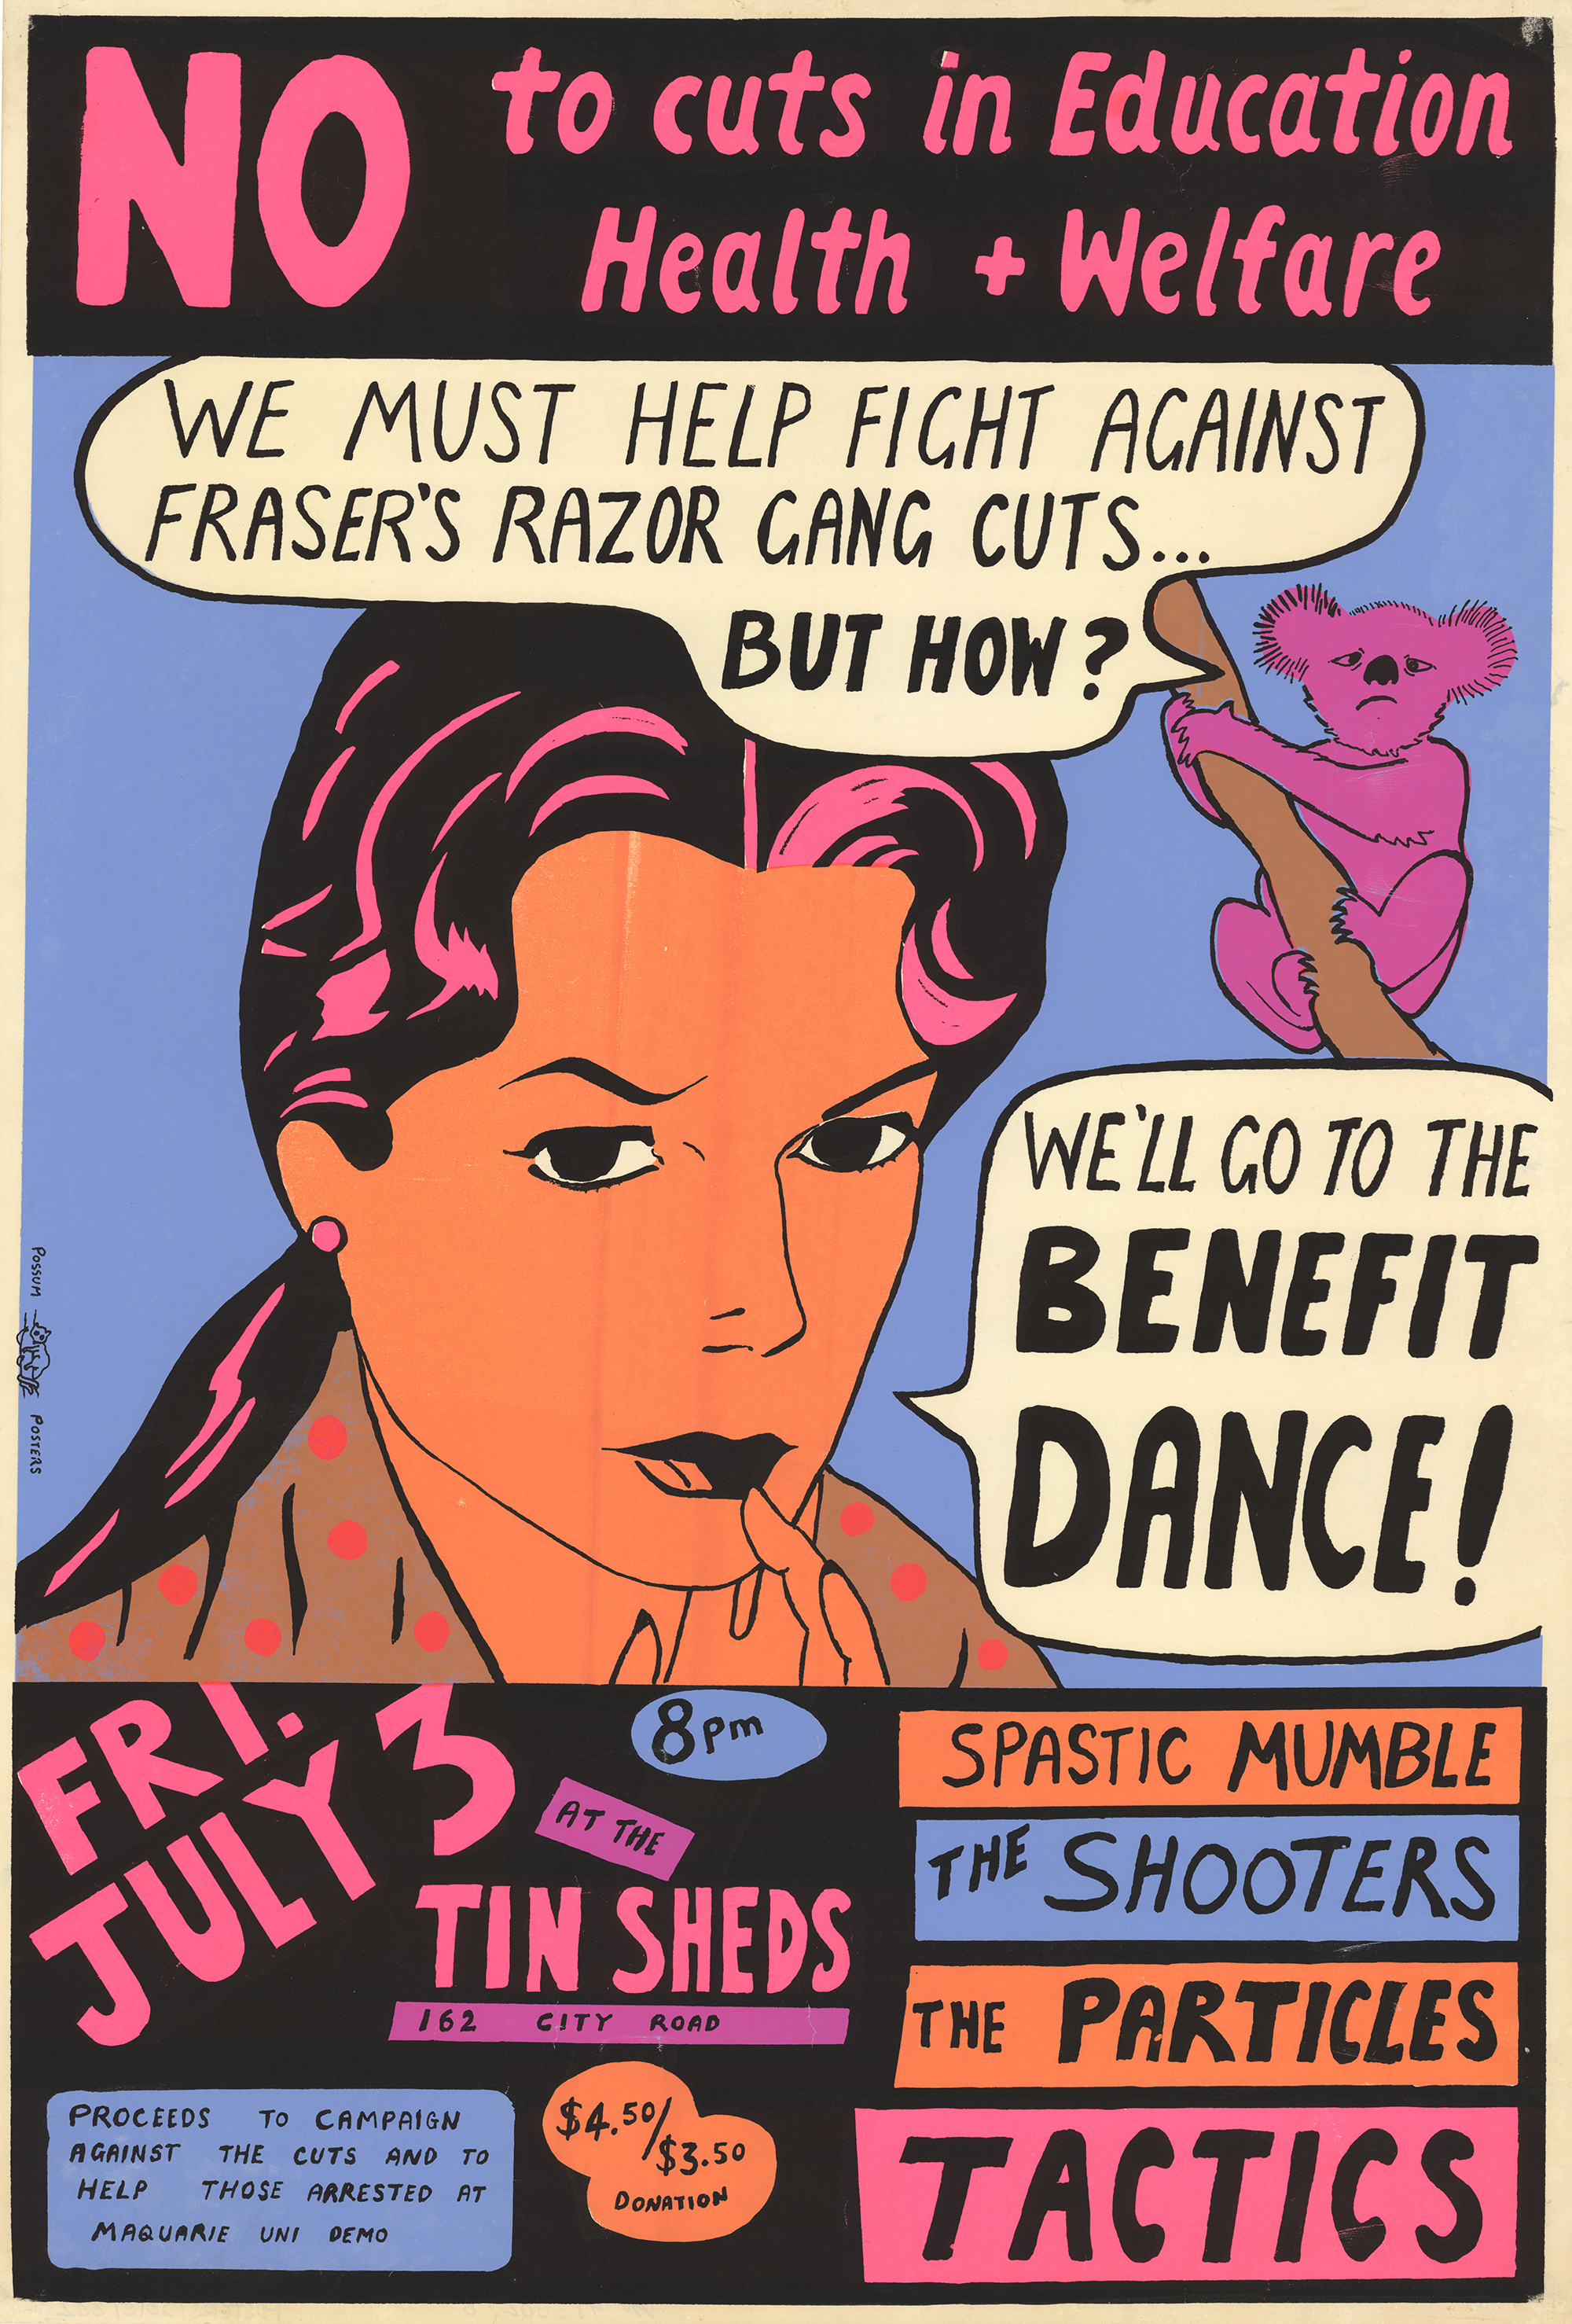 Poster "No to cuts in Education Health & Welfare" Benefit Dance 